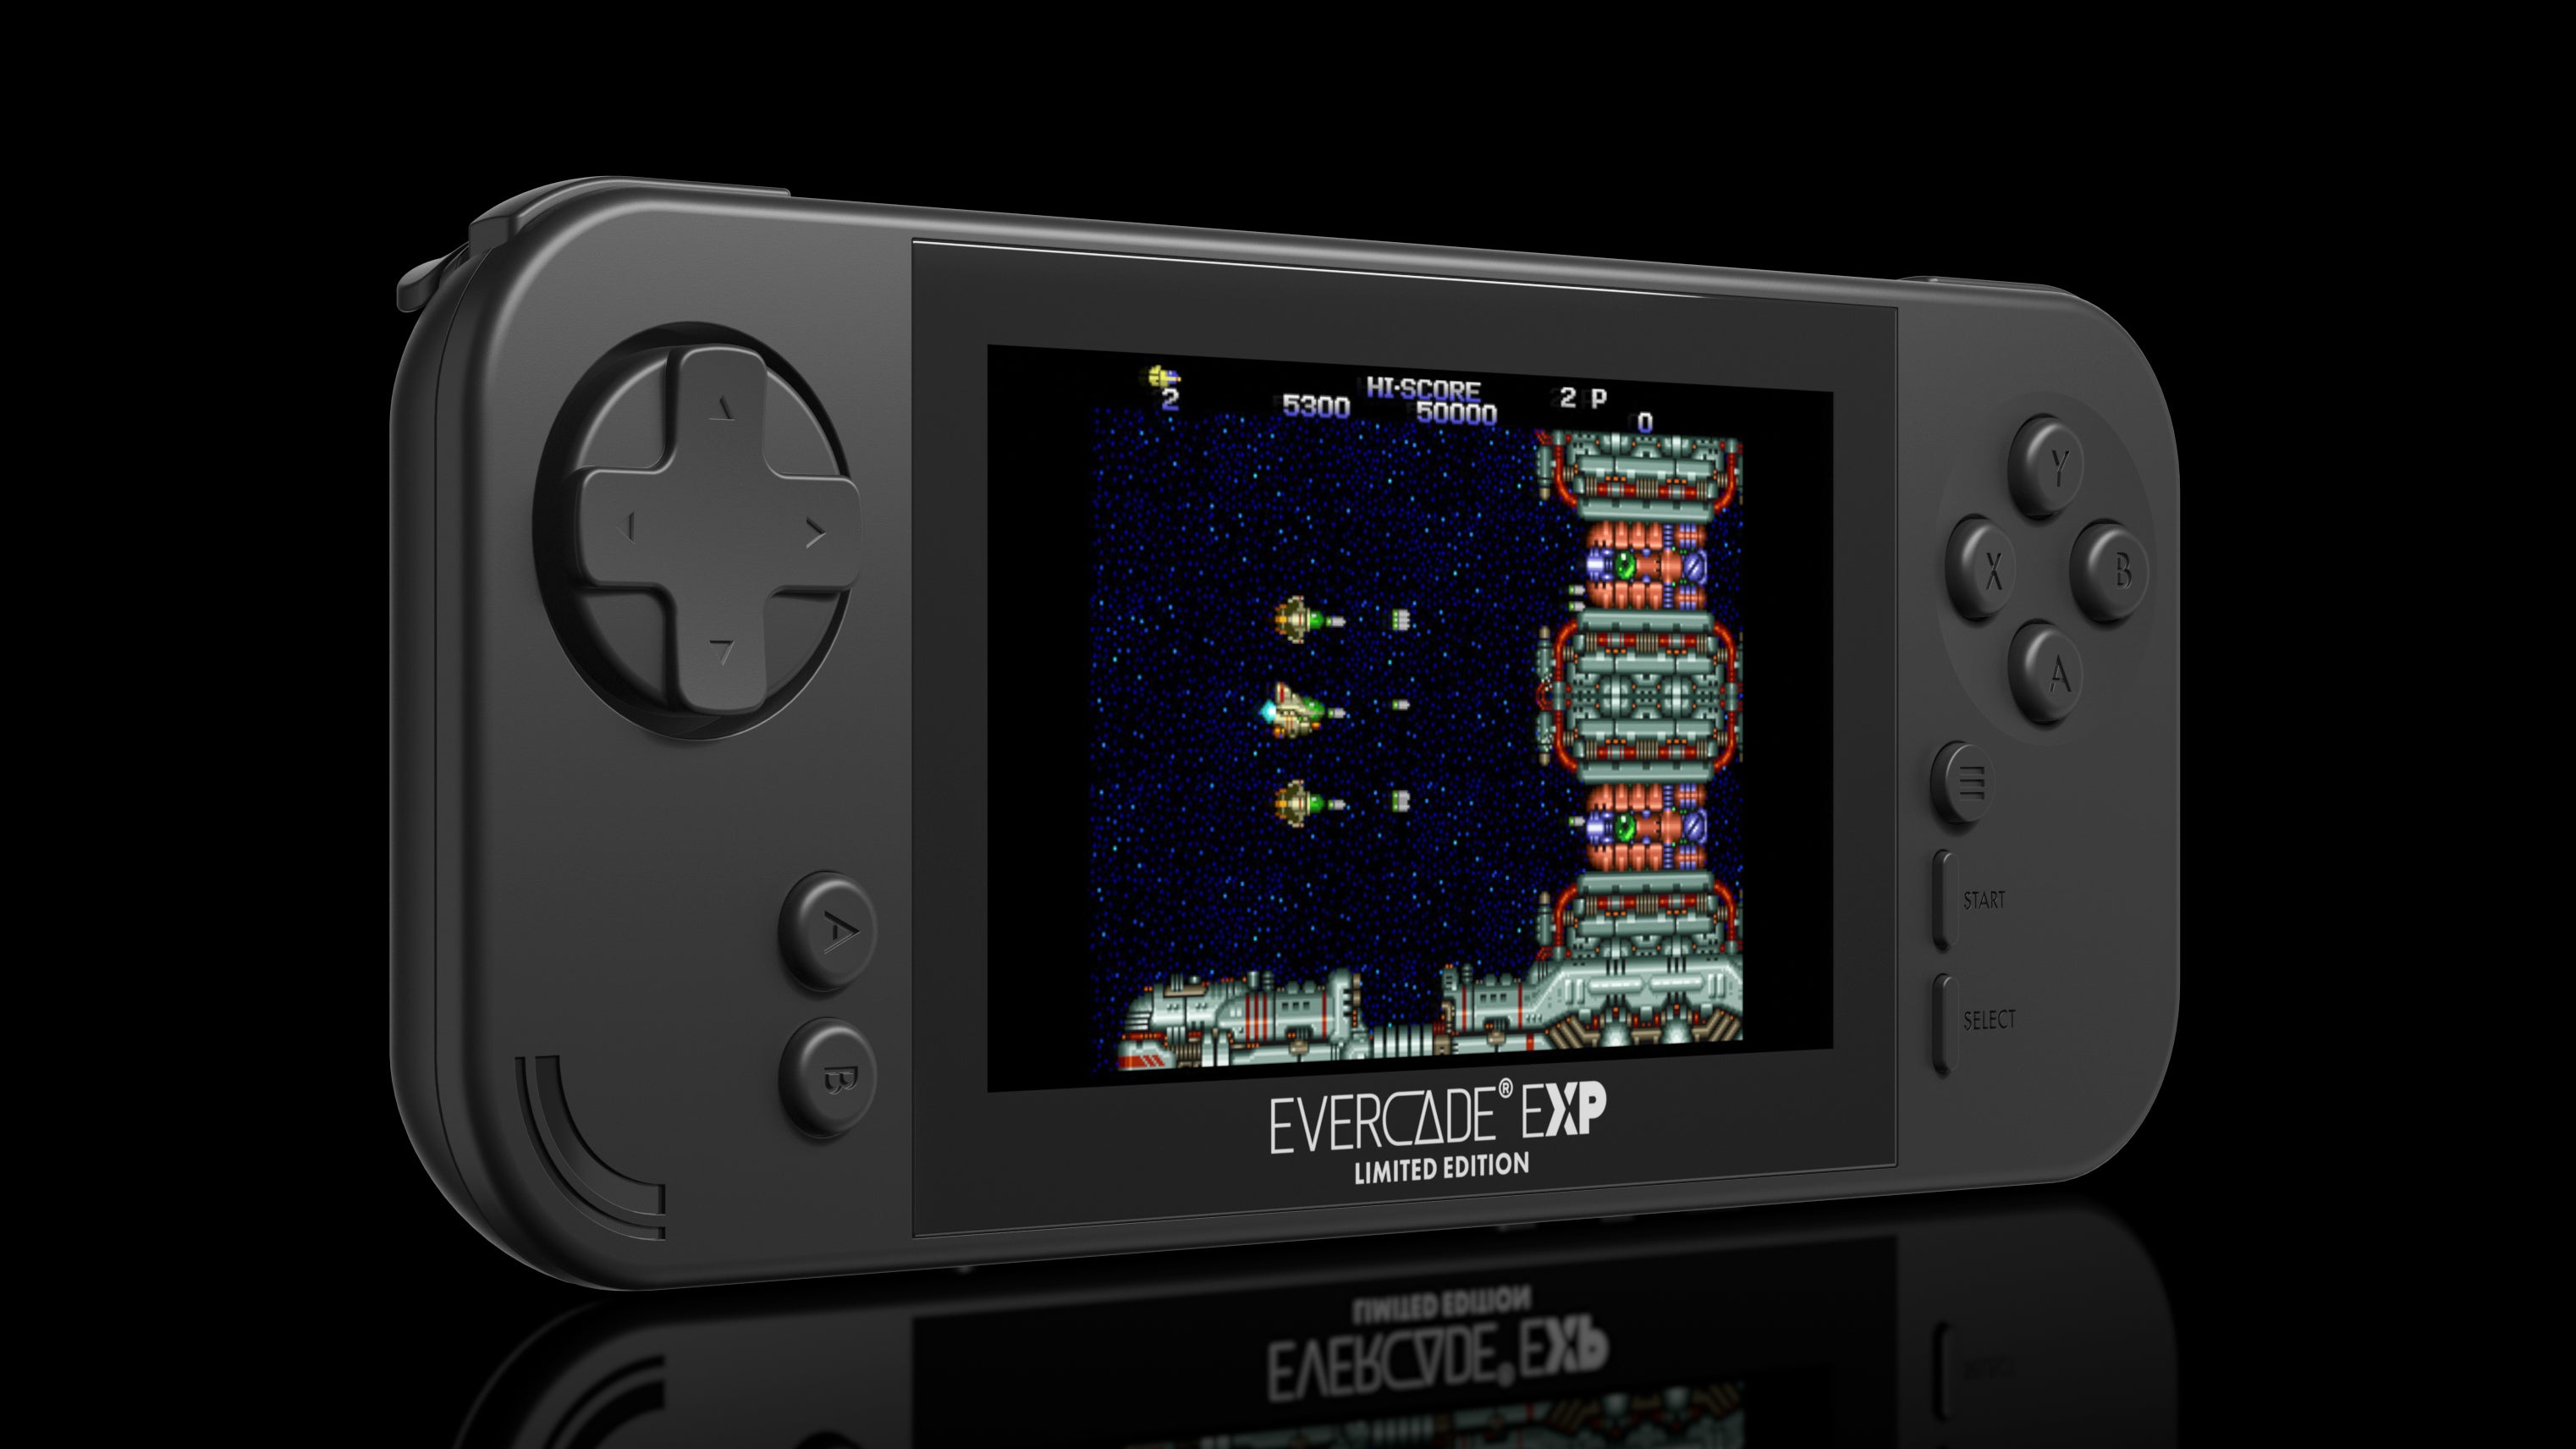 The Next Evercade Retro Arcade Handheld Is Getting Wi-Fi and a New Portrait Mode